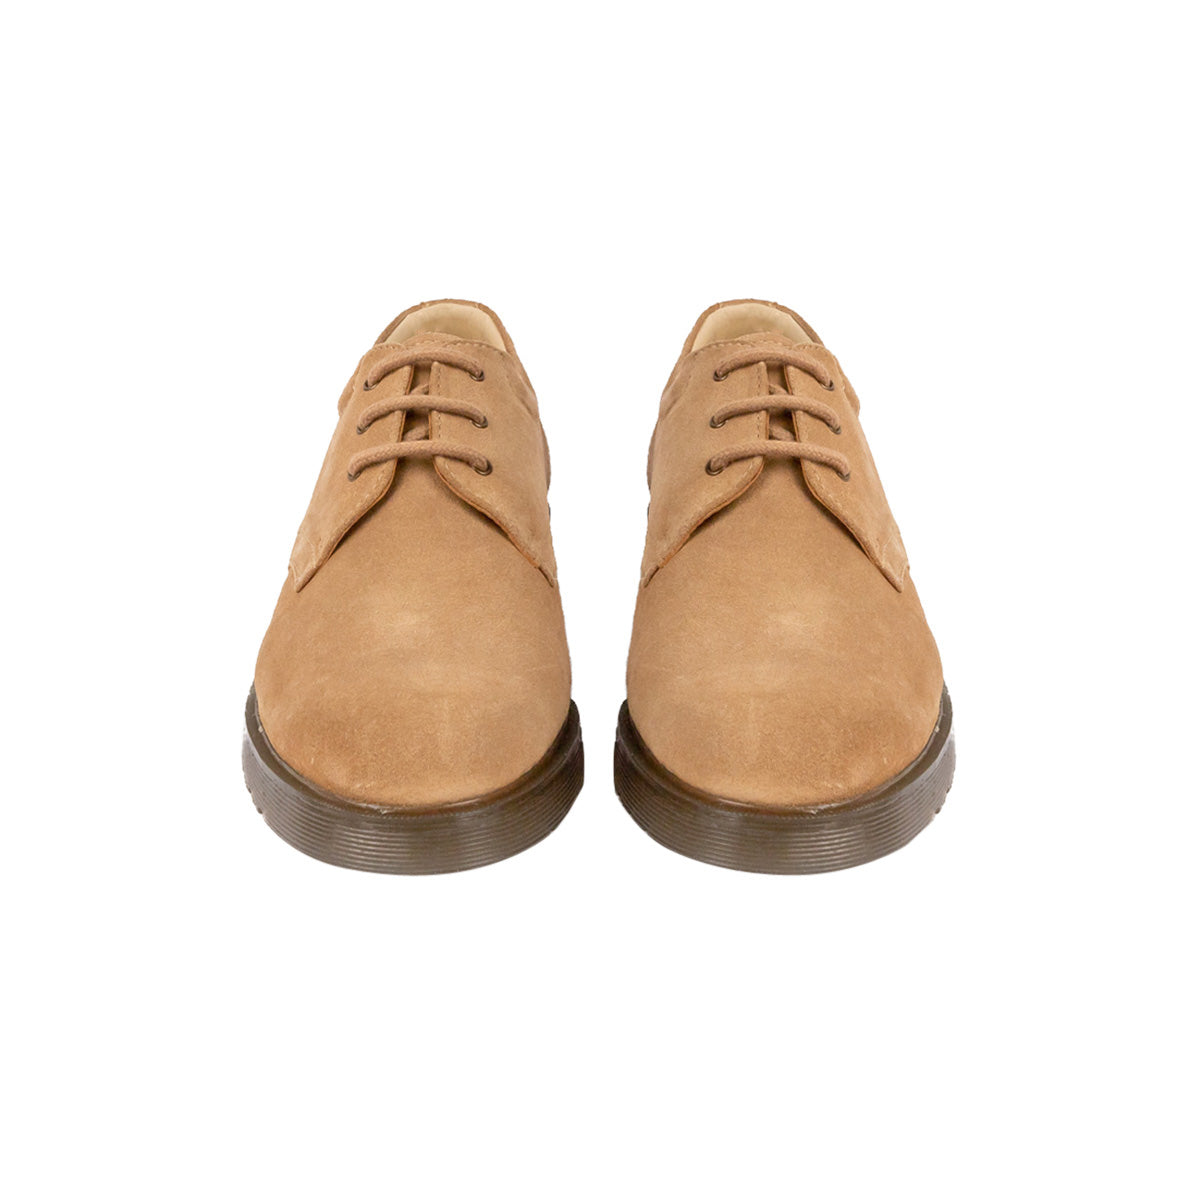 Men suede Leather Casuals ǀ BARRY 8200